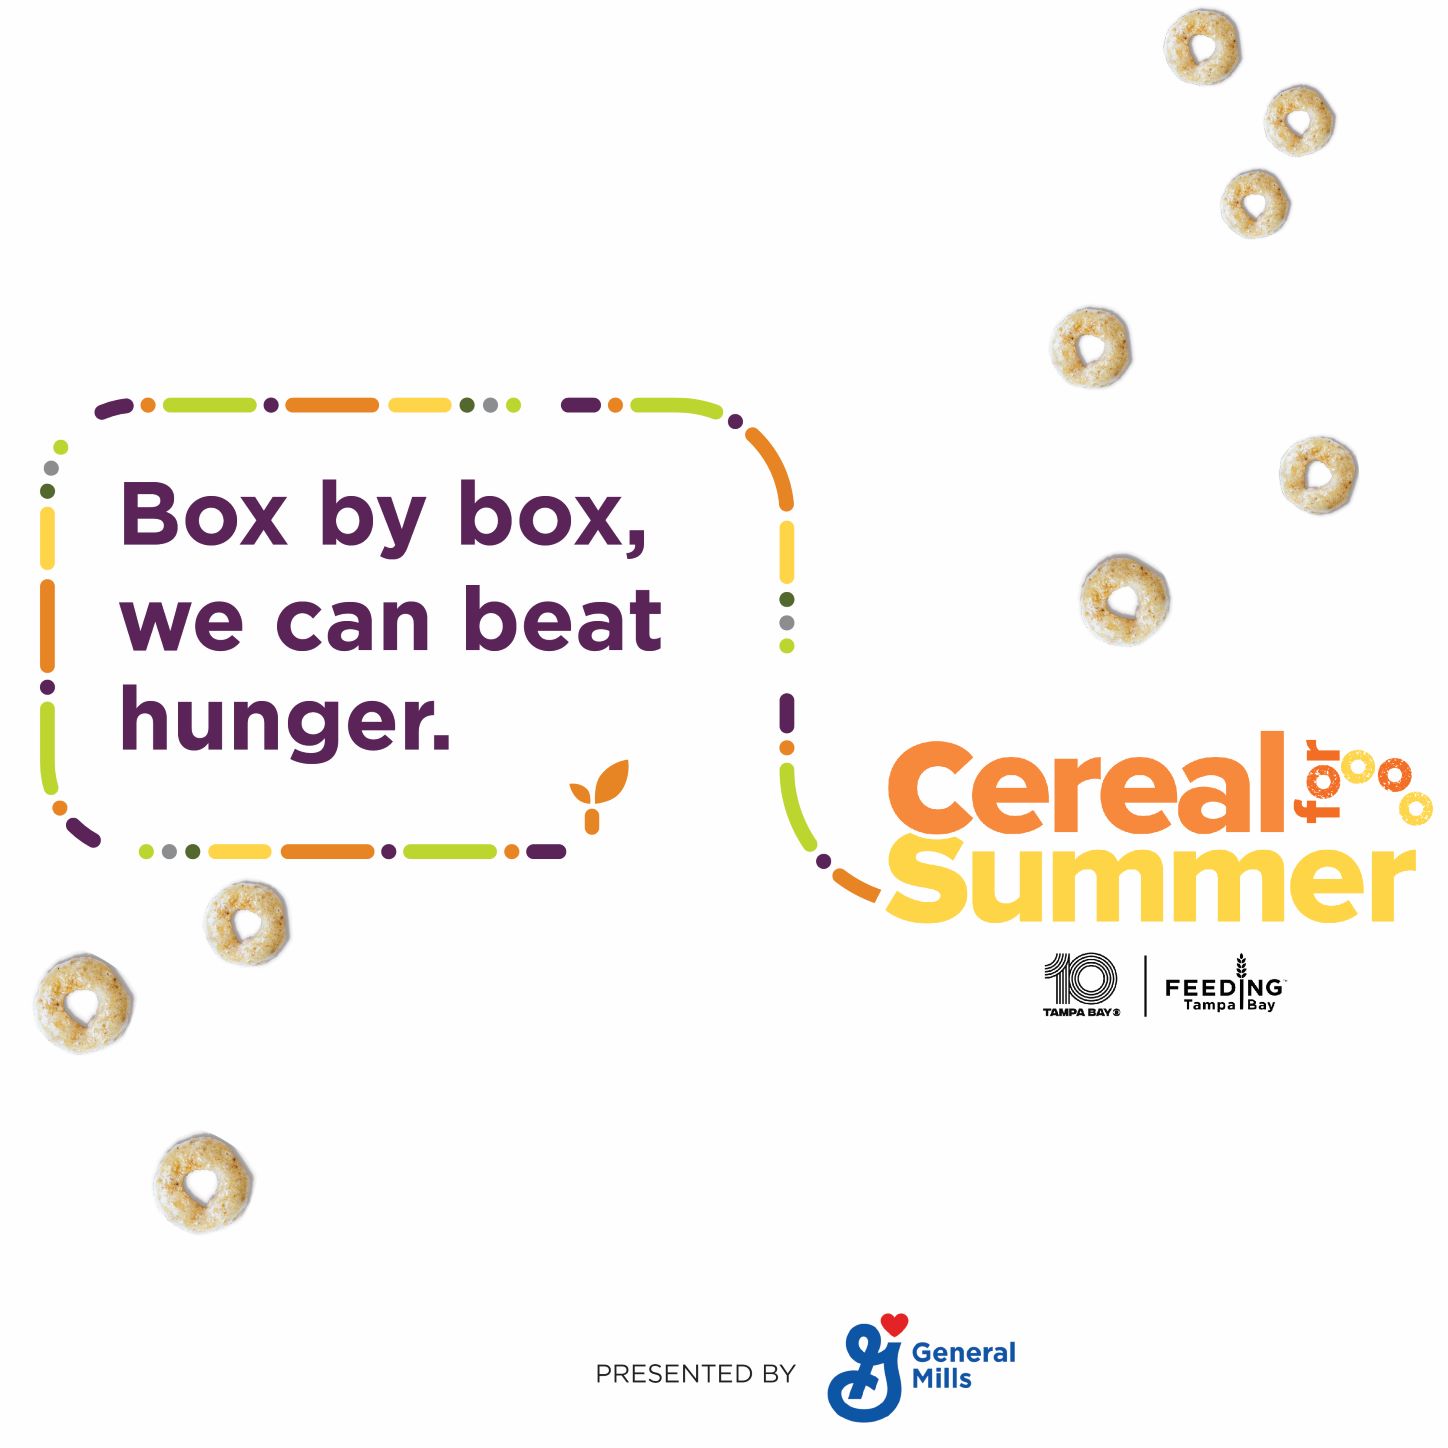 Graphic saying "Box by box, we can beat hunger"